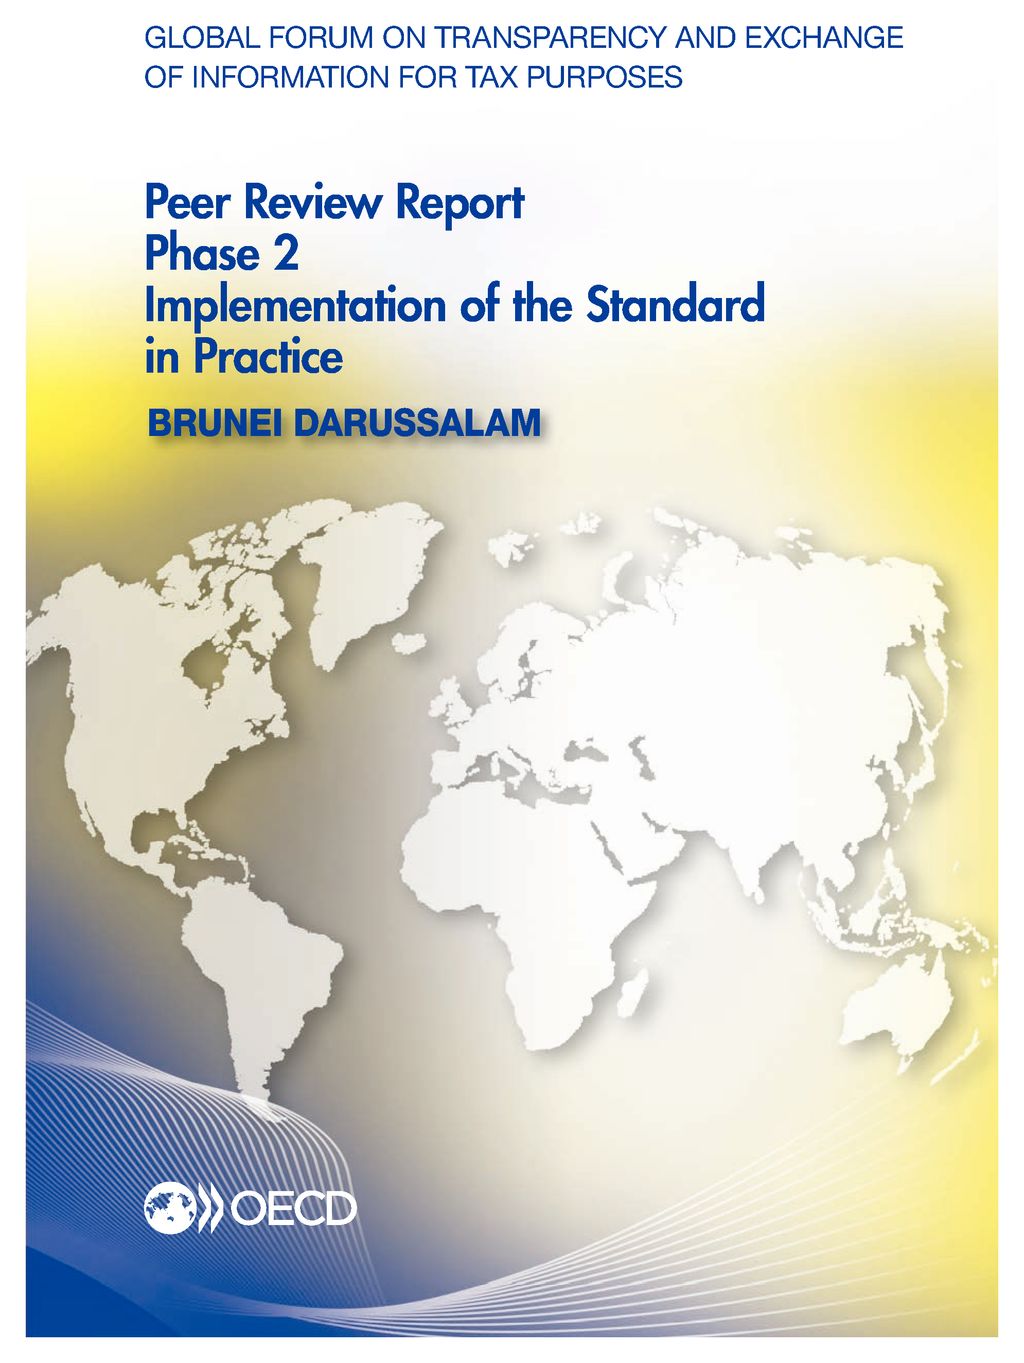 Global forum on transparency and exchange of information for tax purposes peer reviews : Brunei Darussalam 2016. phase 2, implementation of the standard in practice 책표지